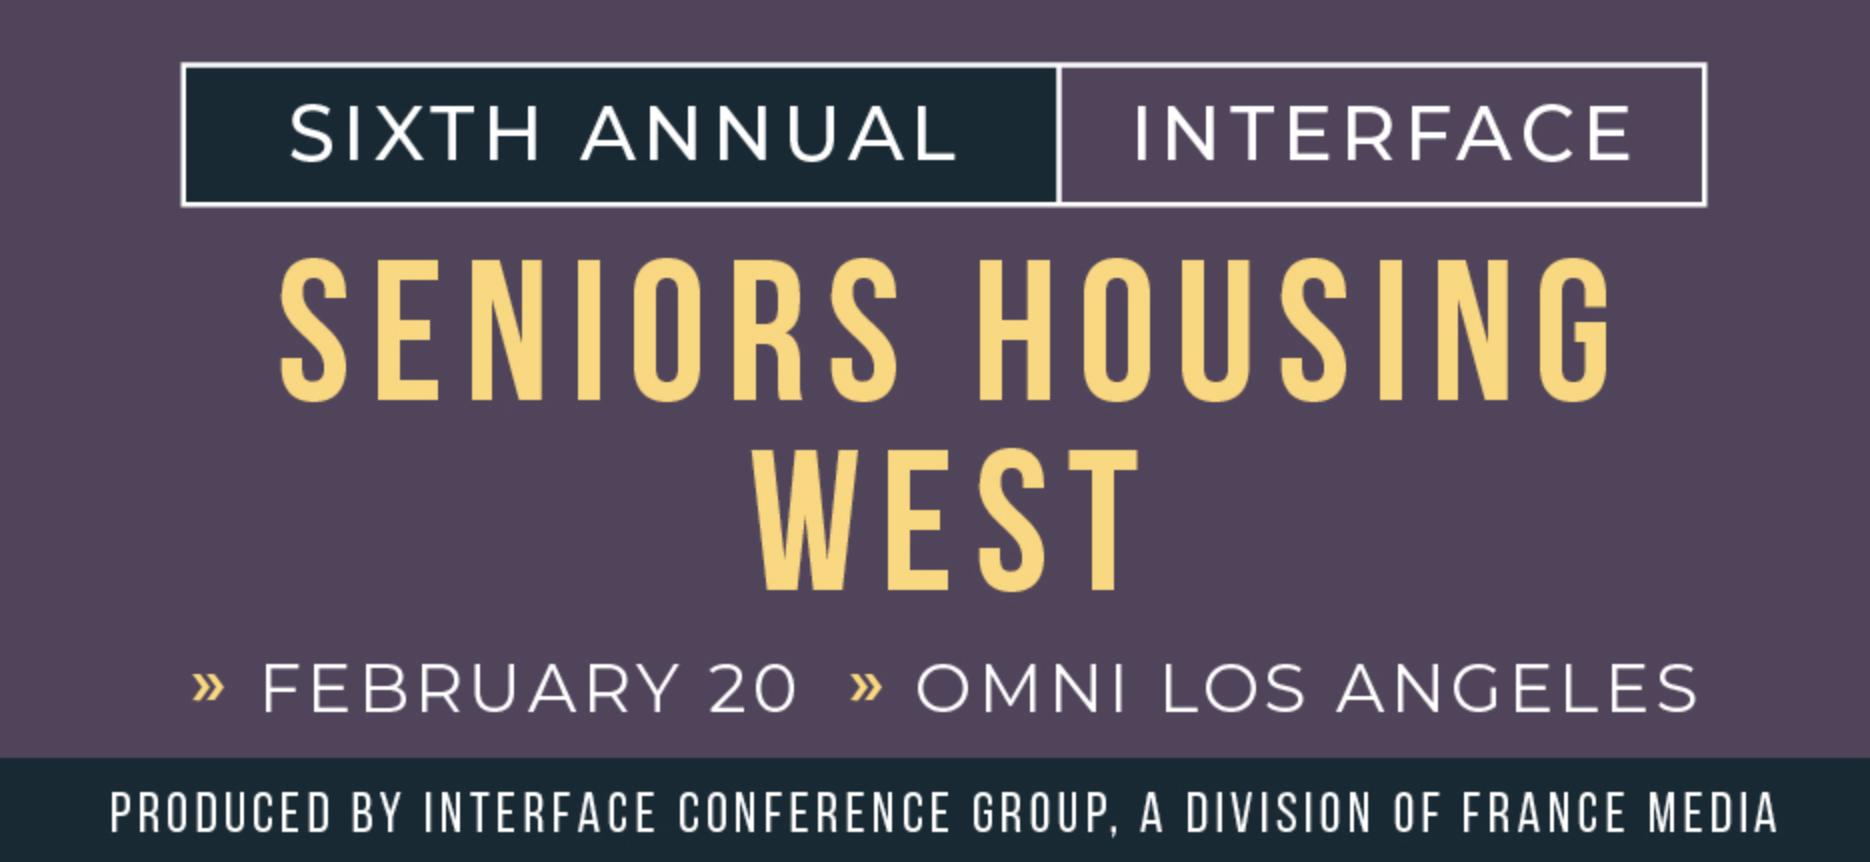 InterFace Seniors Housing West 2020 InterFace Conference Group